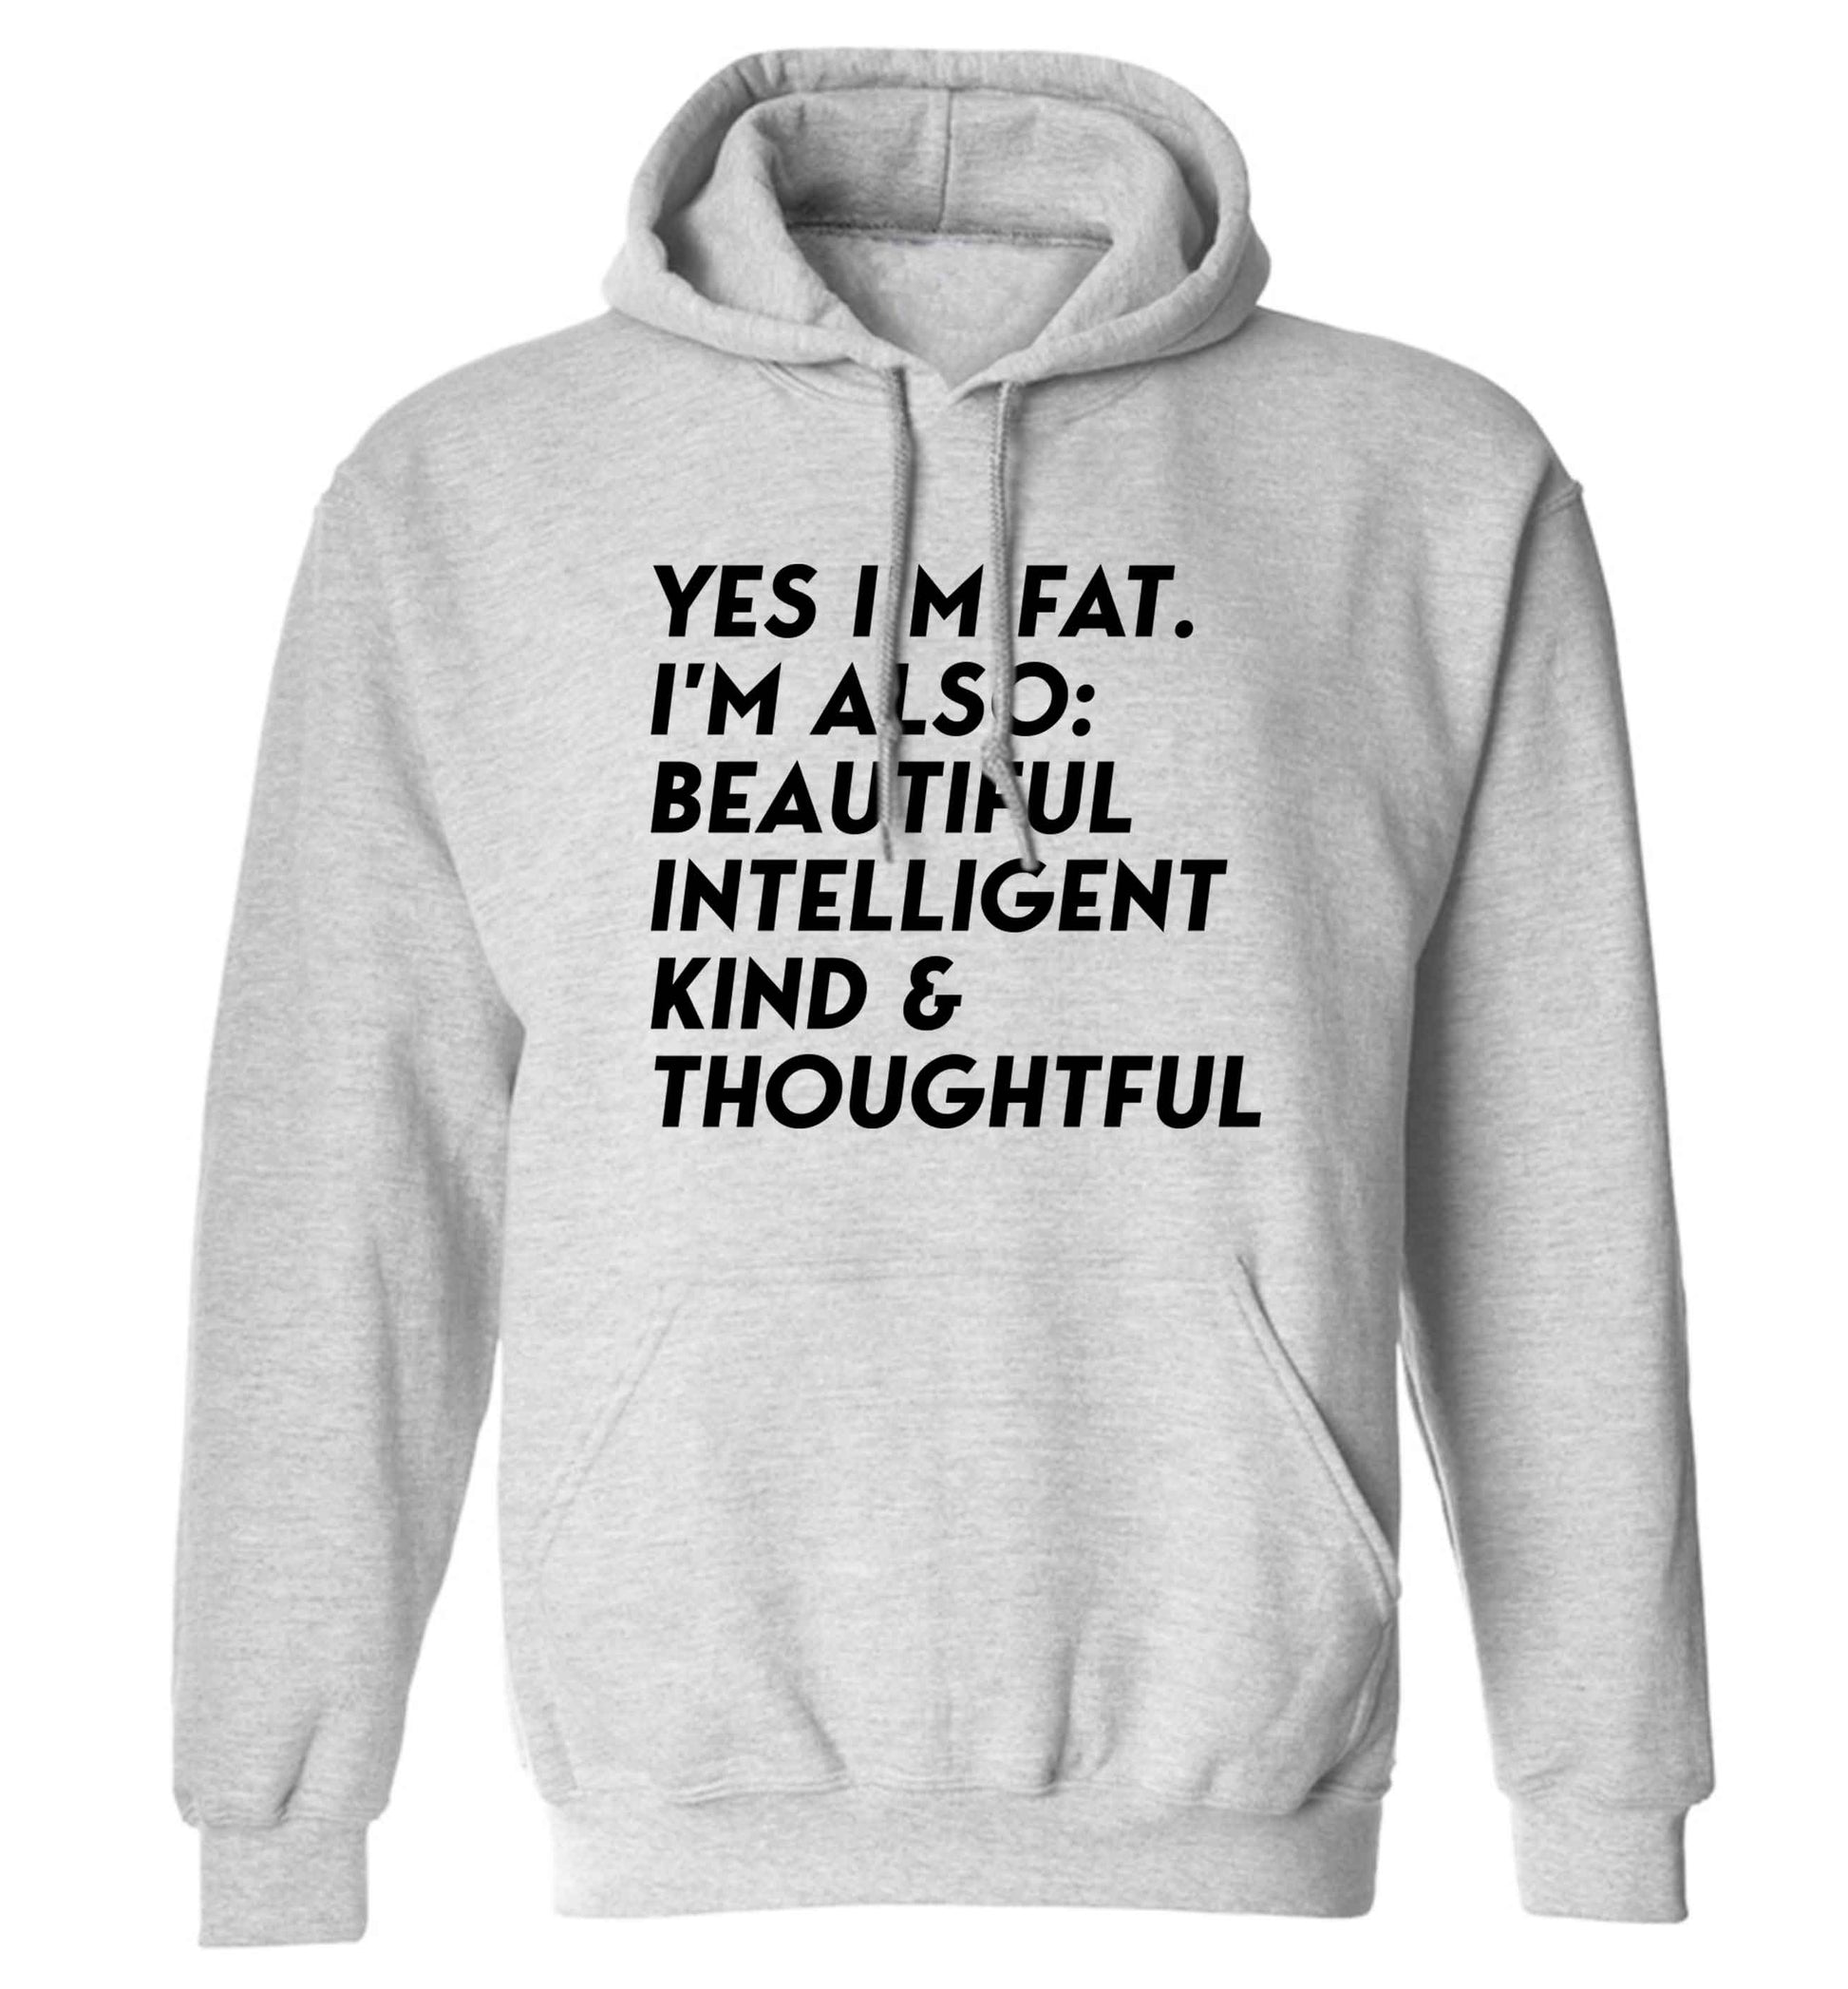 Yes I'm fat. I'm also: Beautiful intelligent kind and thoughtful adults unisex grey hoodie 2XL